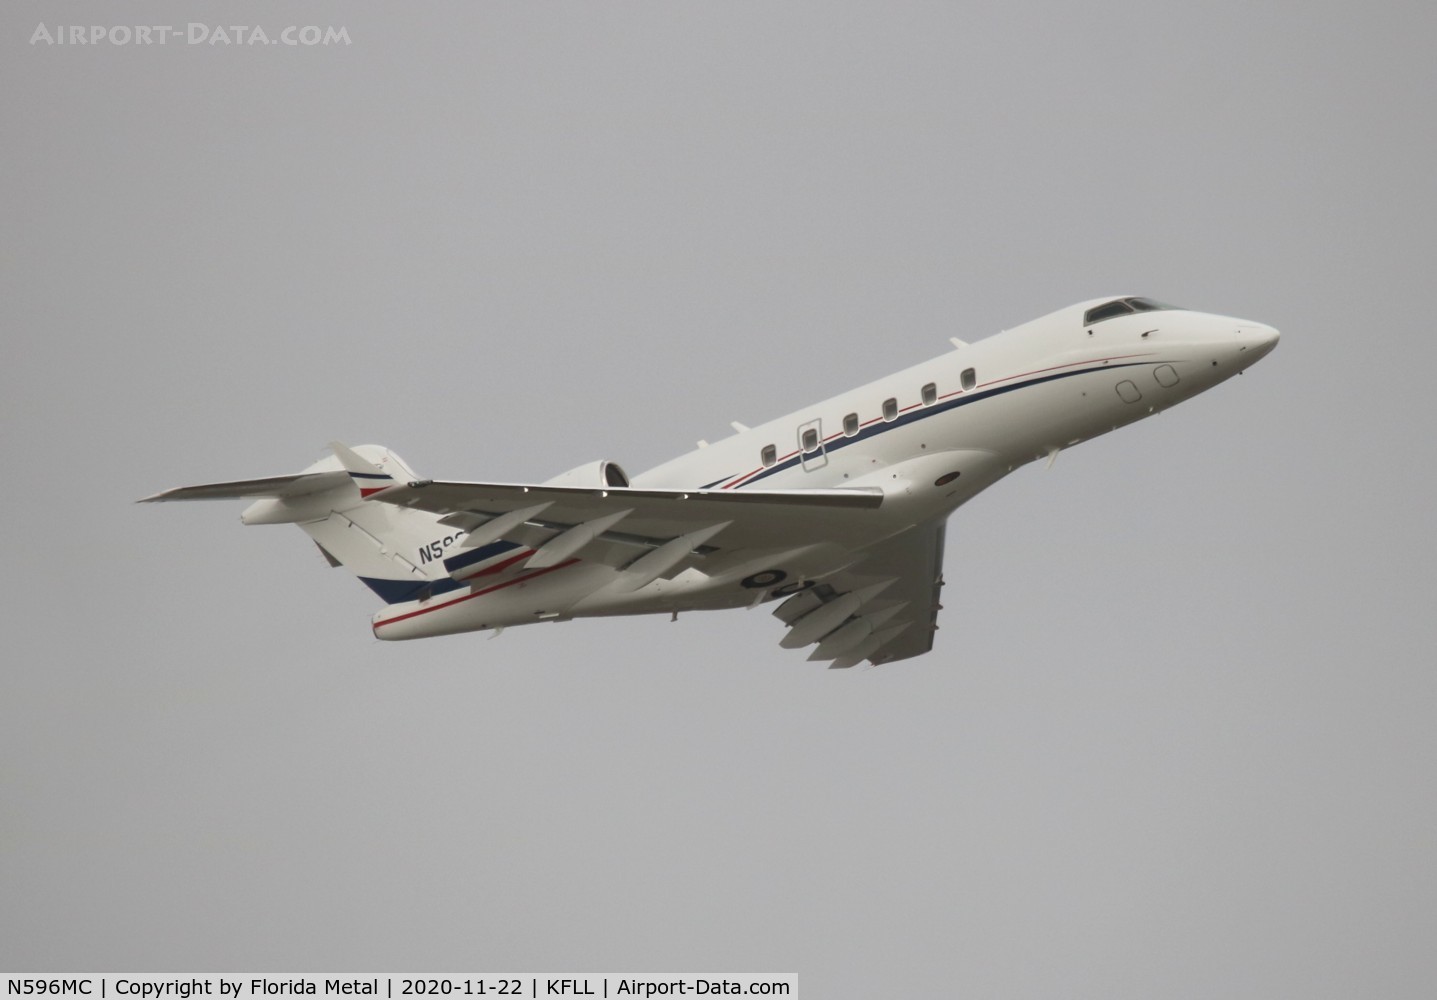 N596MC, 2004 Bombardier Challenger 300 (BD-100-1A10) C/N 20027, Challenger 300 zx